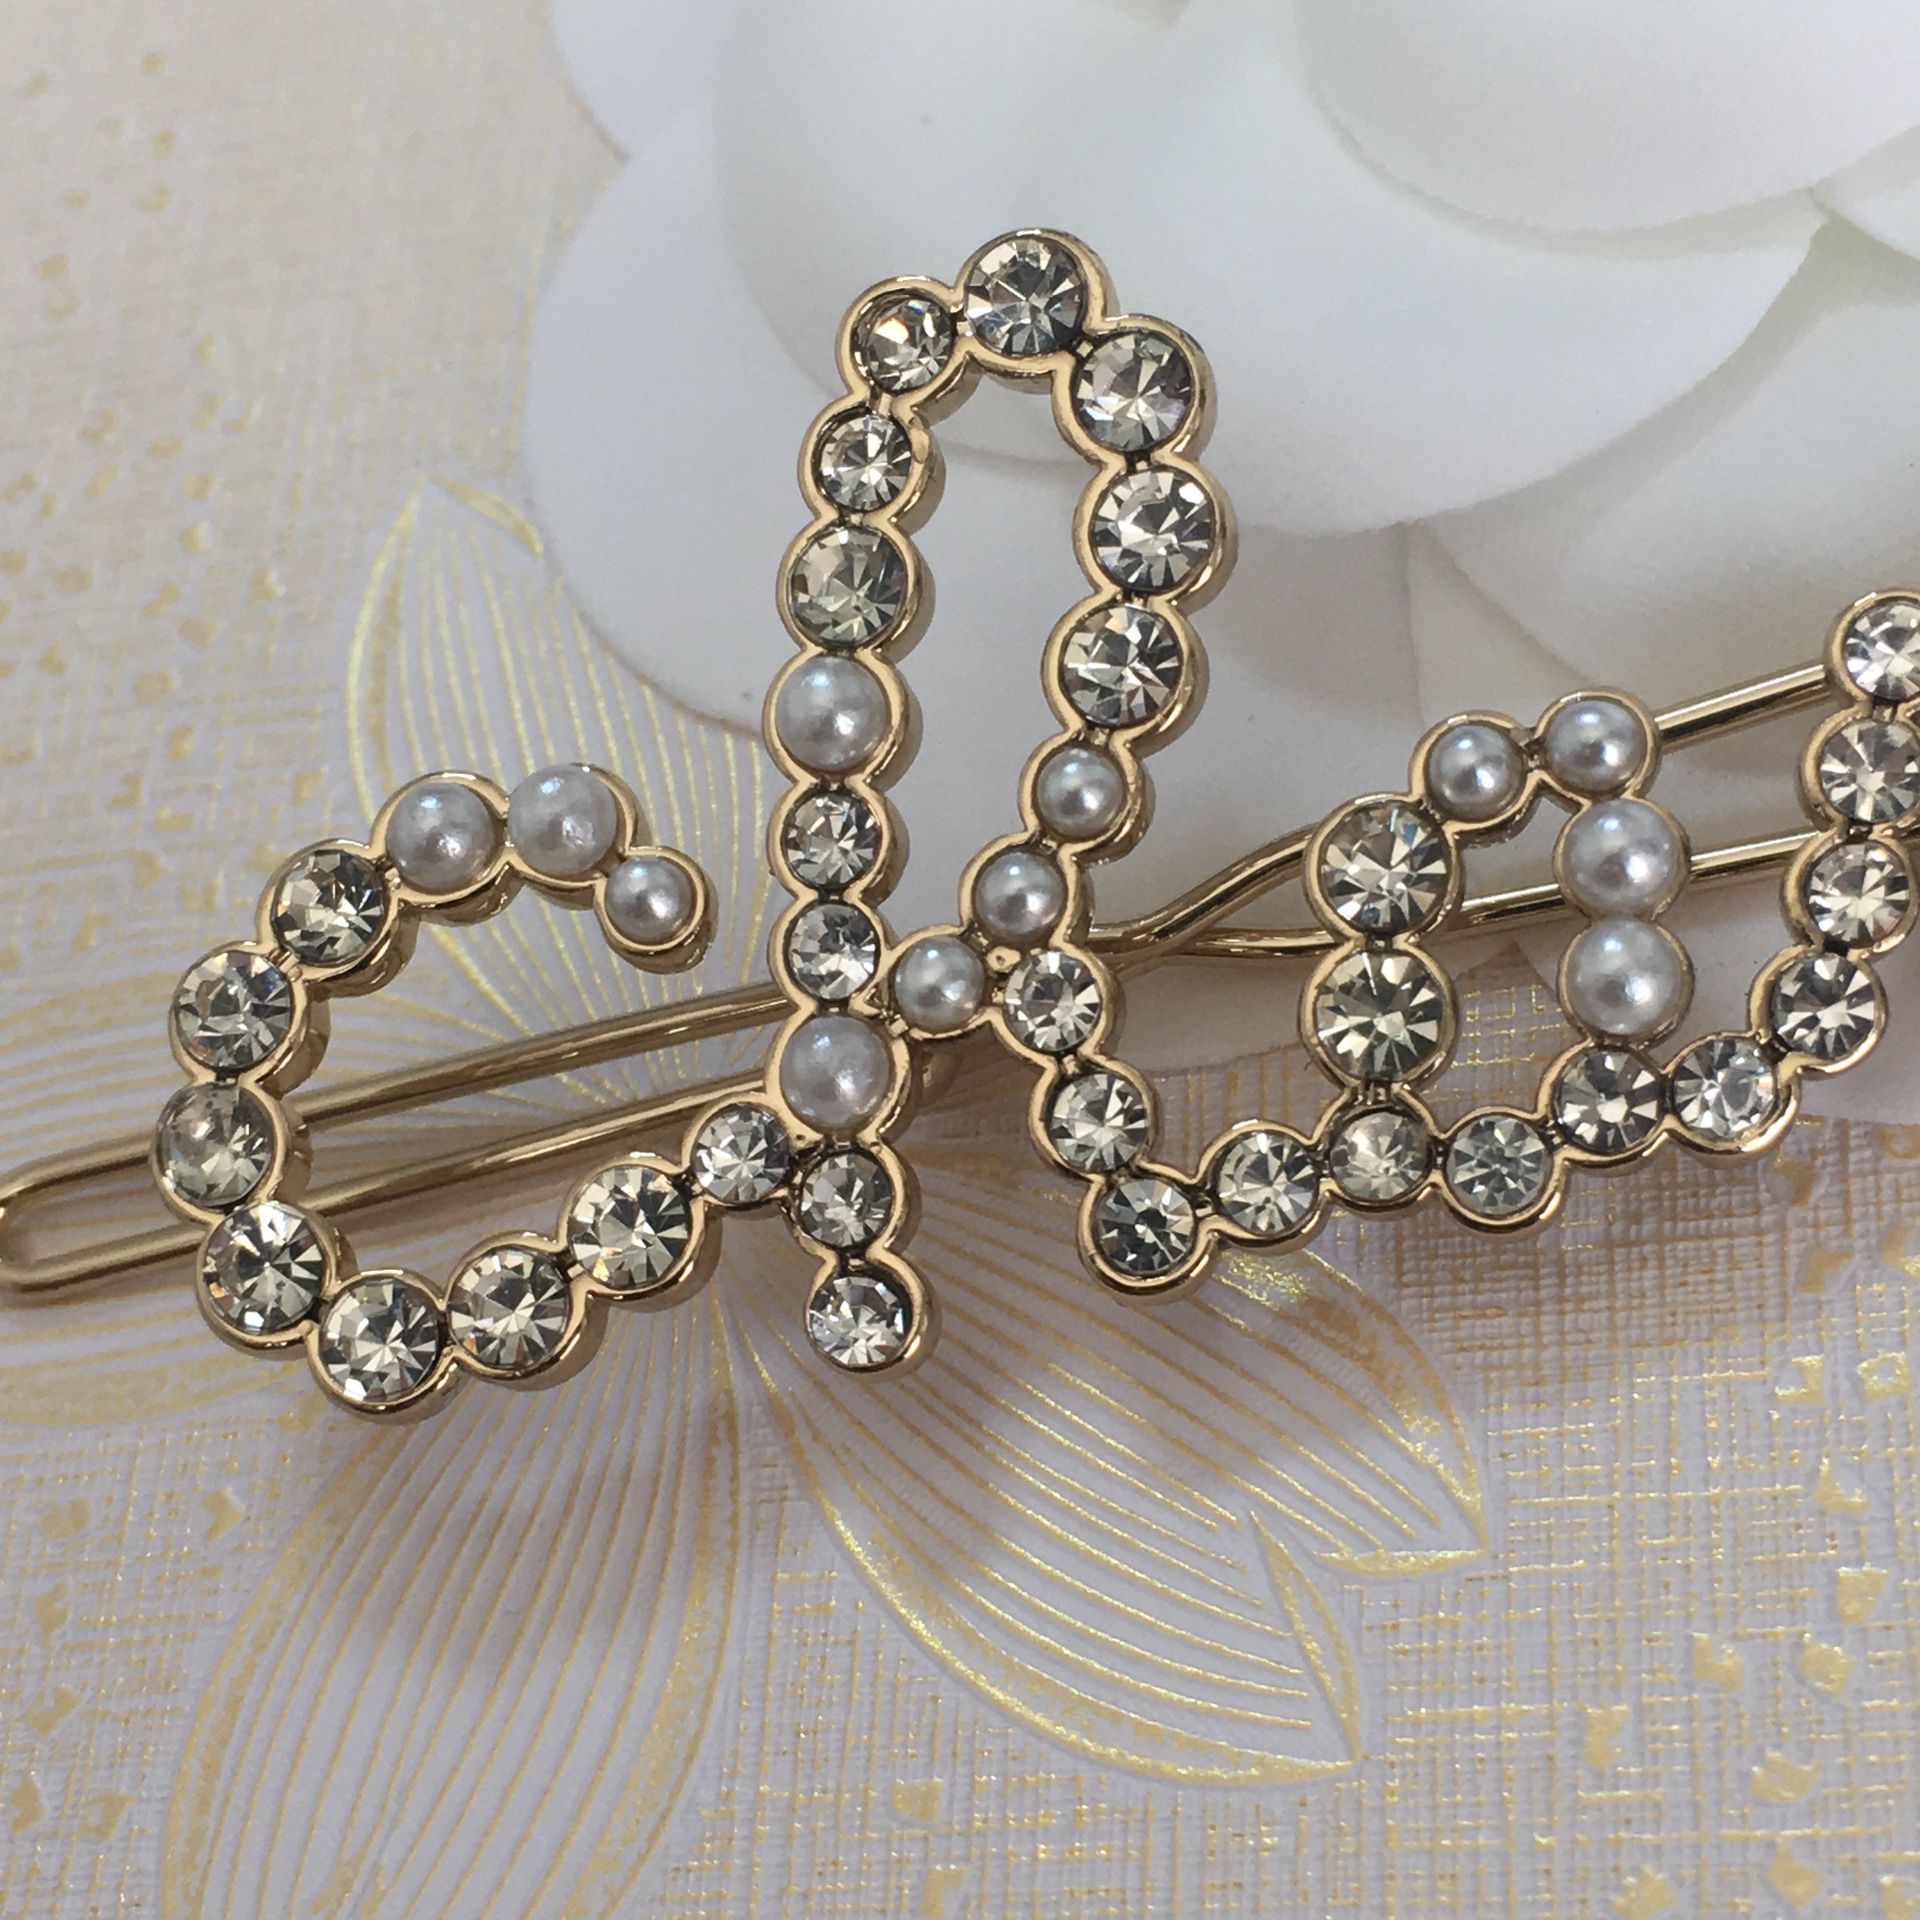 CHANEL Quilted CC Hair Pin Gold 261462